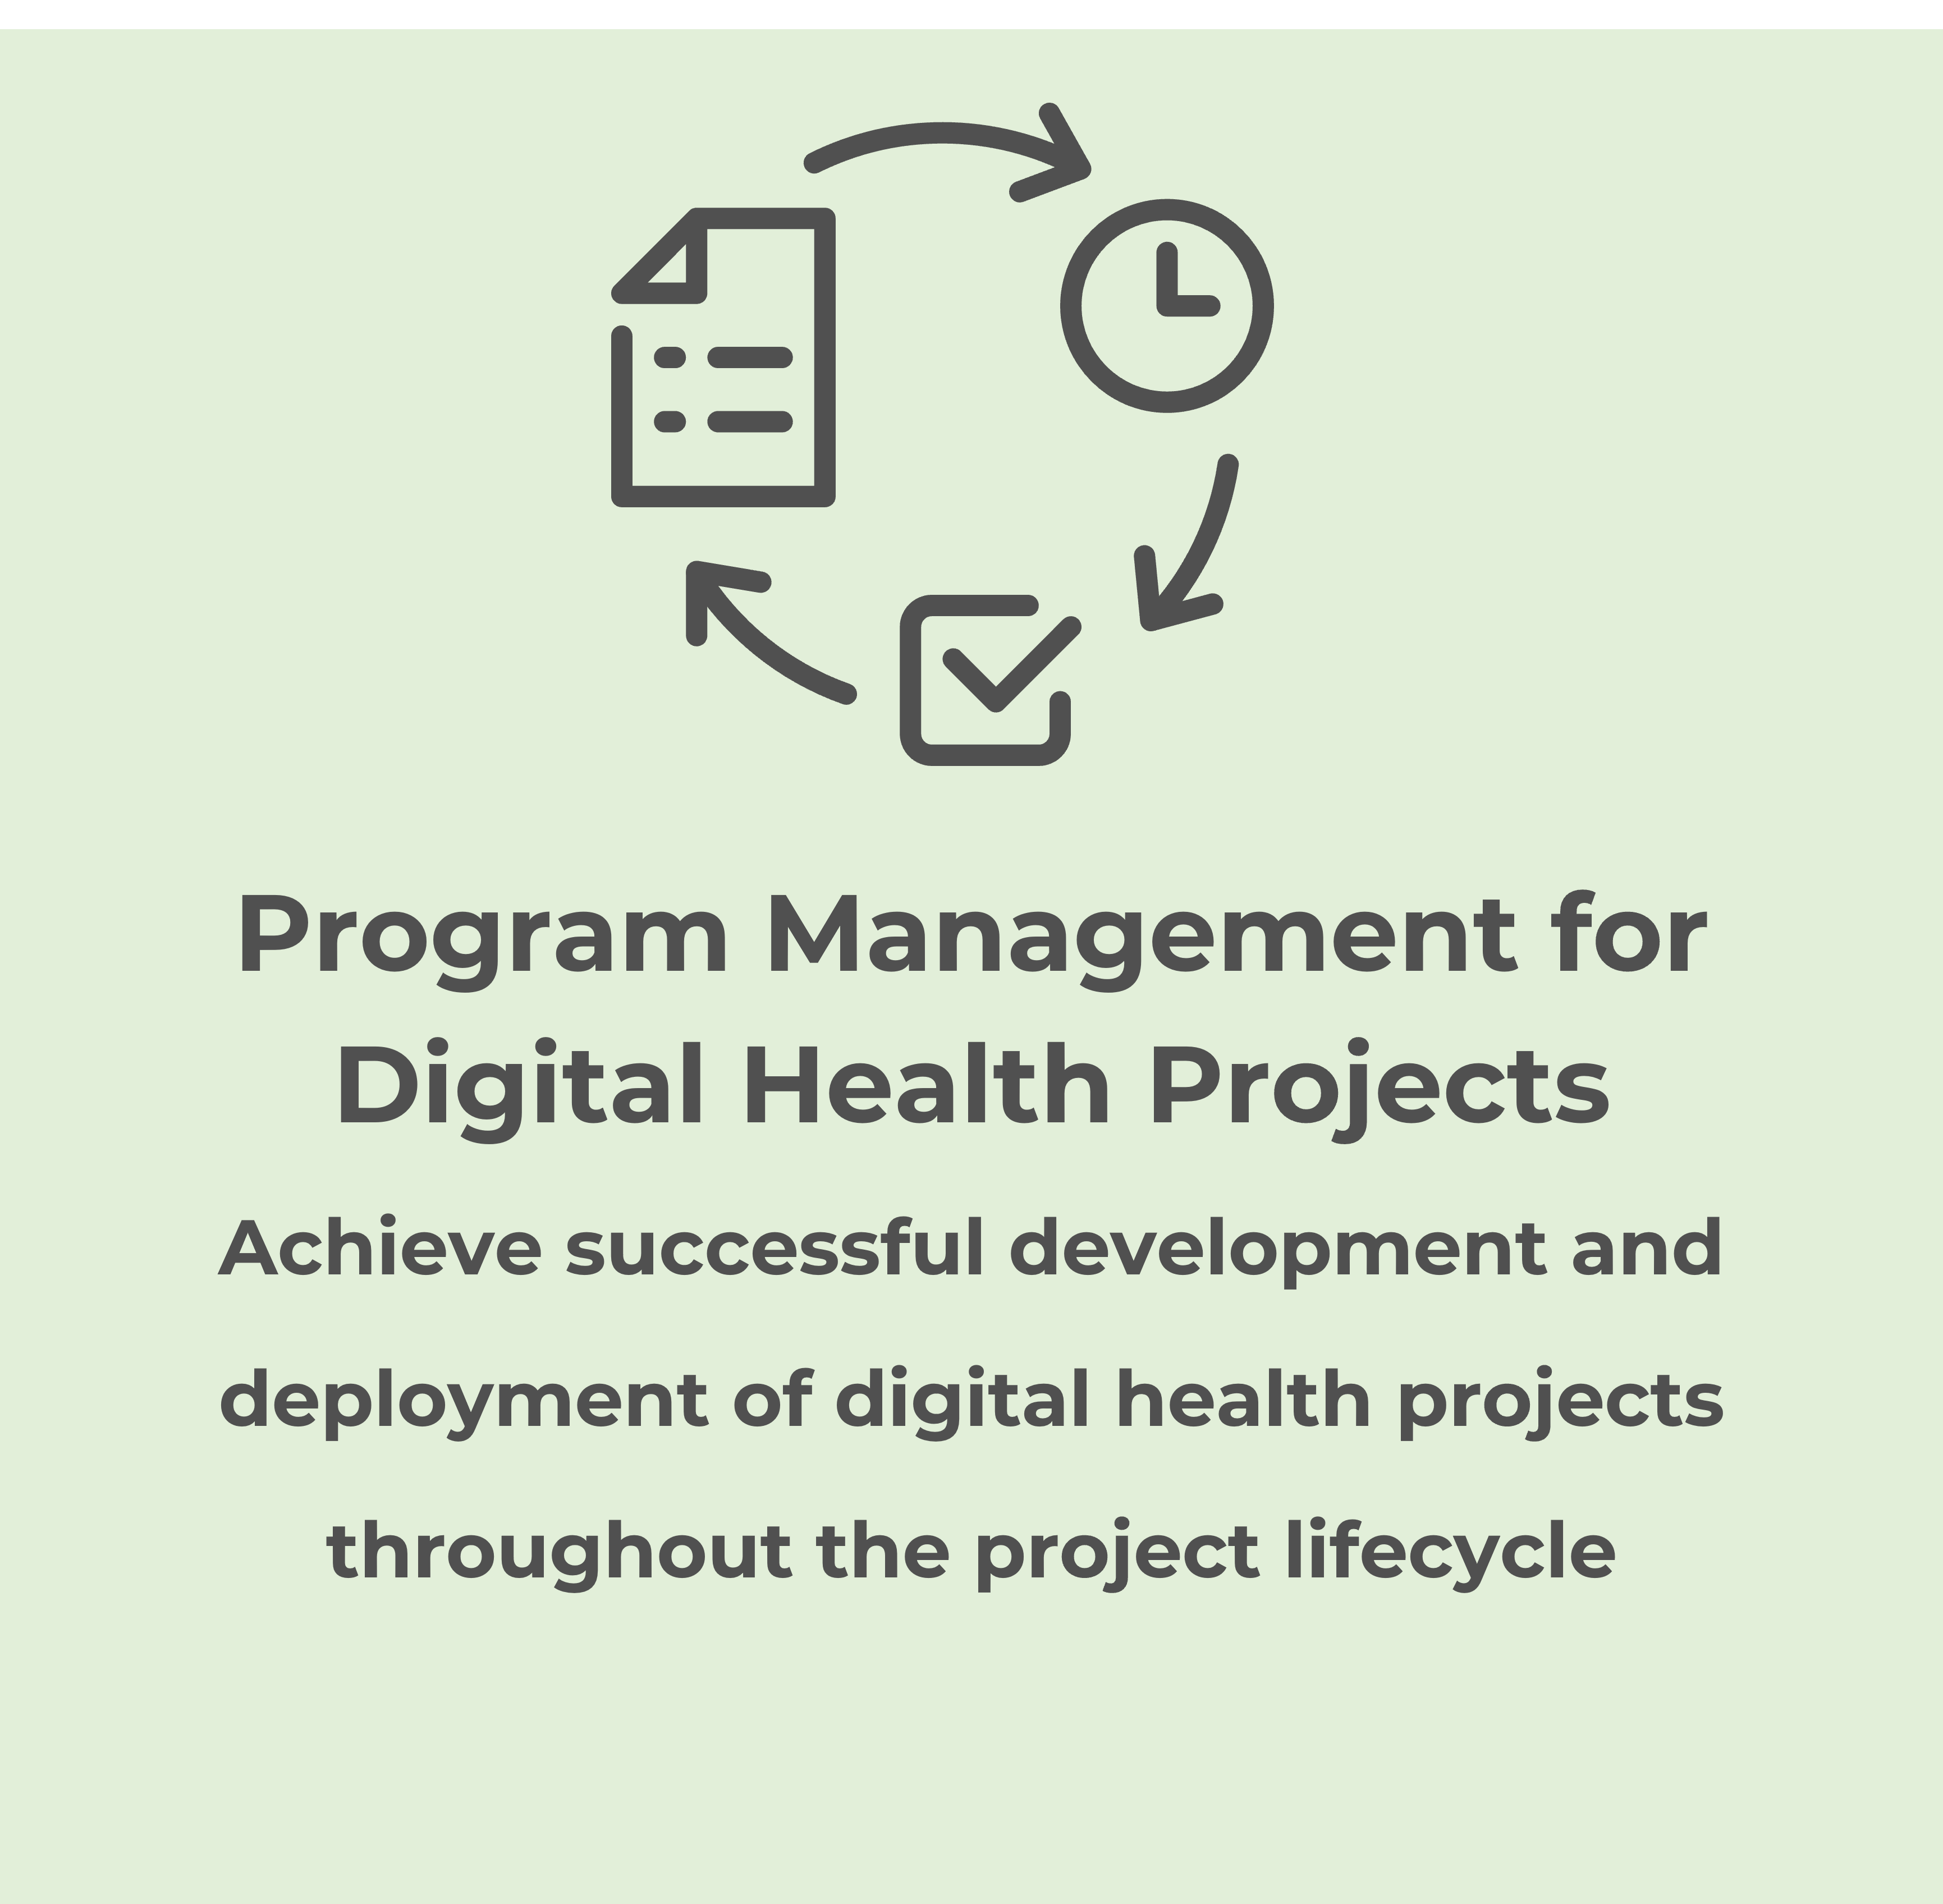 Program Management for Digital Health Projects: Achieve successful development and deployment of digital health projects throughout the project lifecycle  